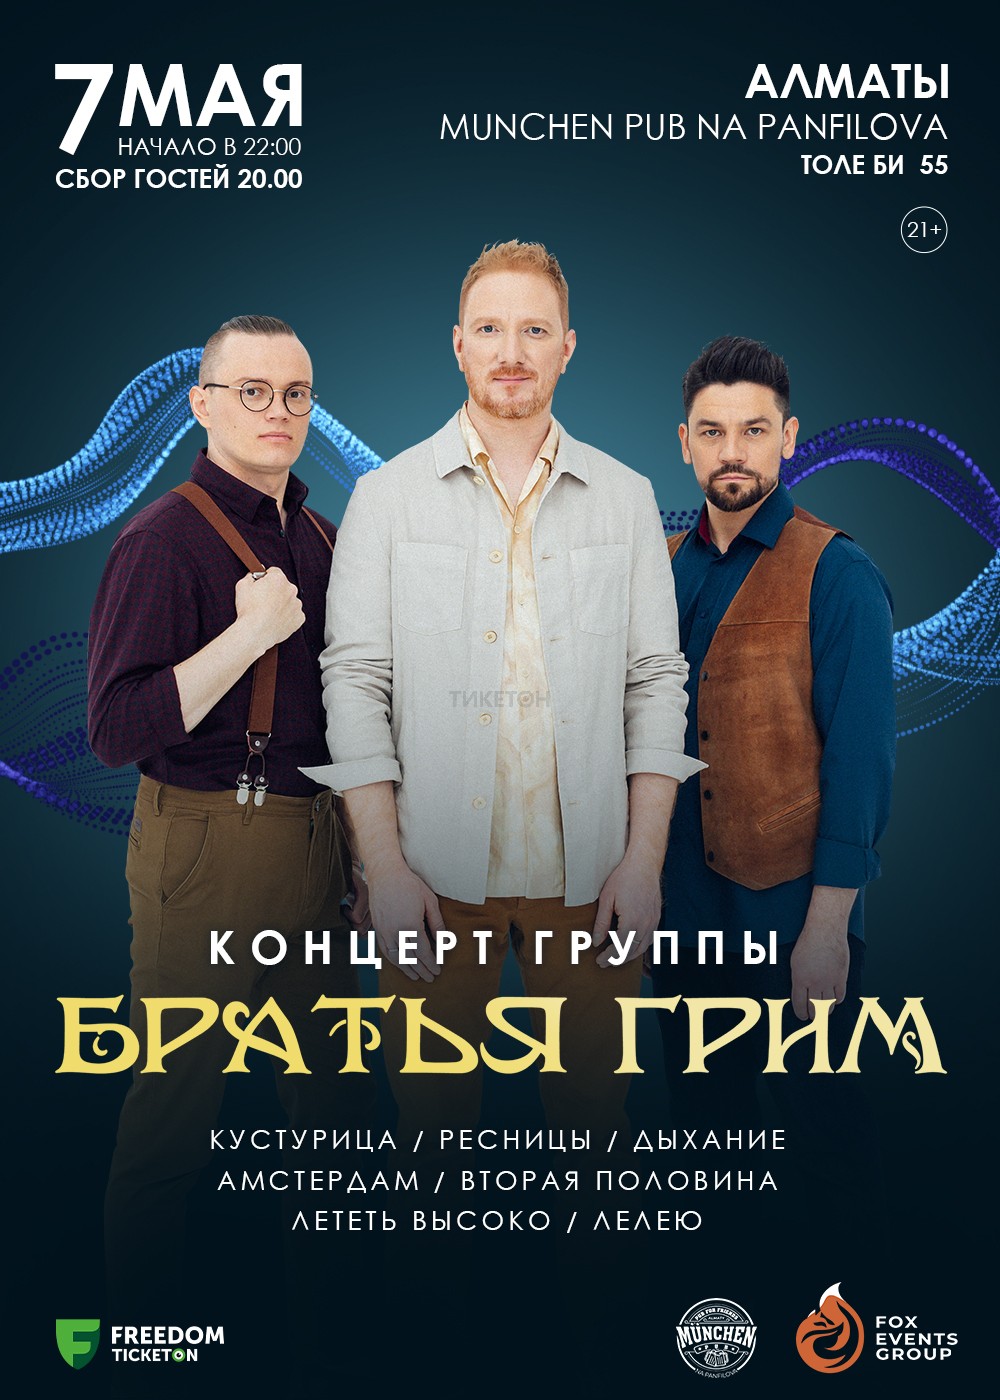 The concert of the band "Brothers Grimm" in Almaty